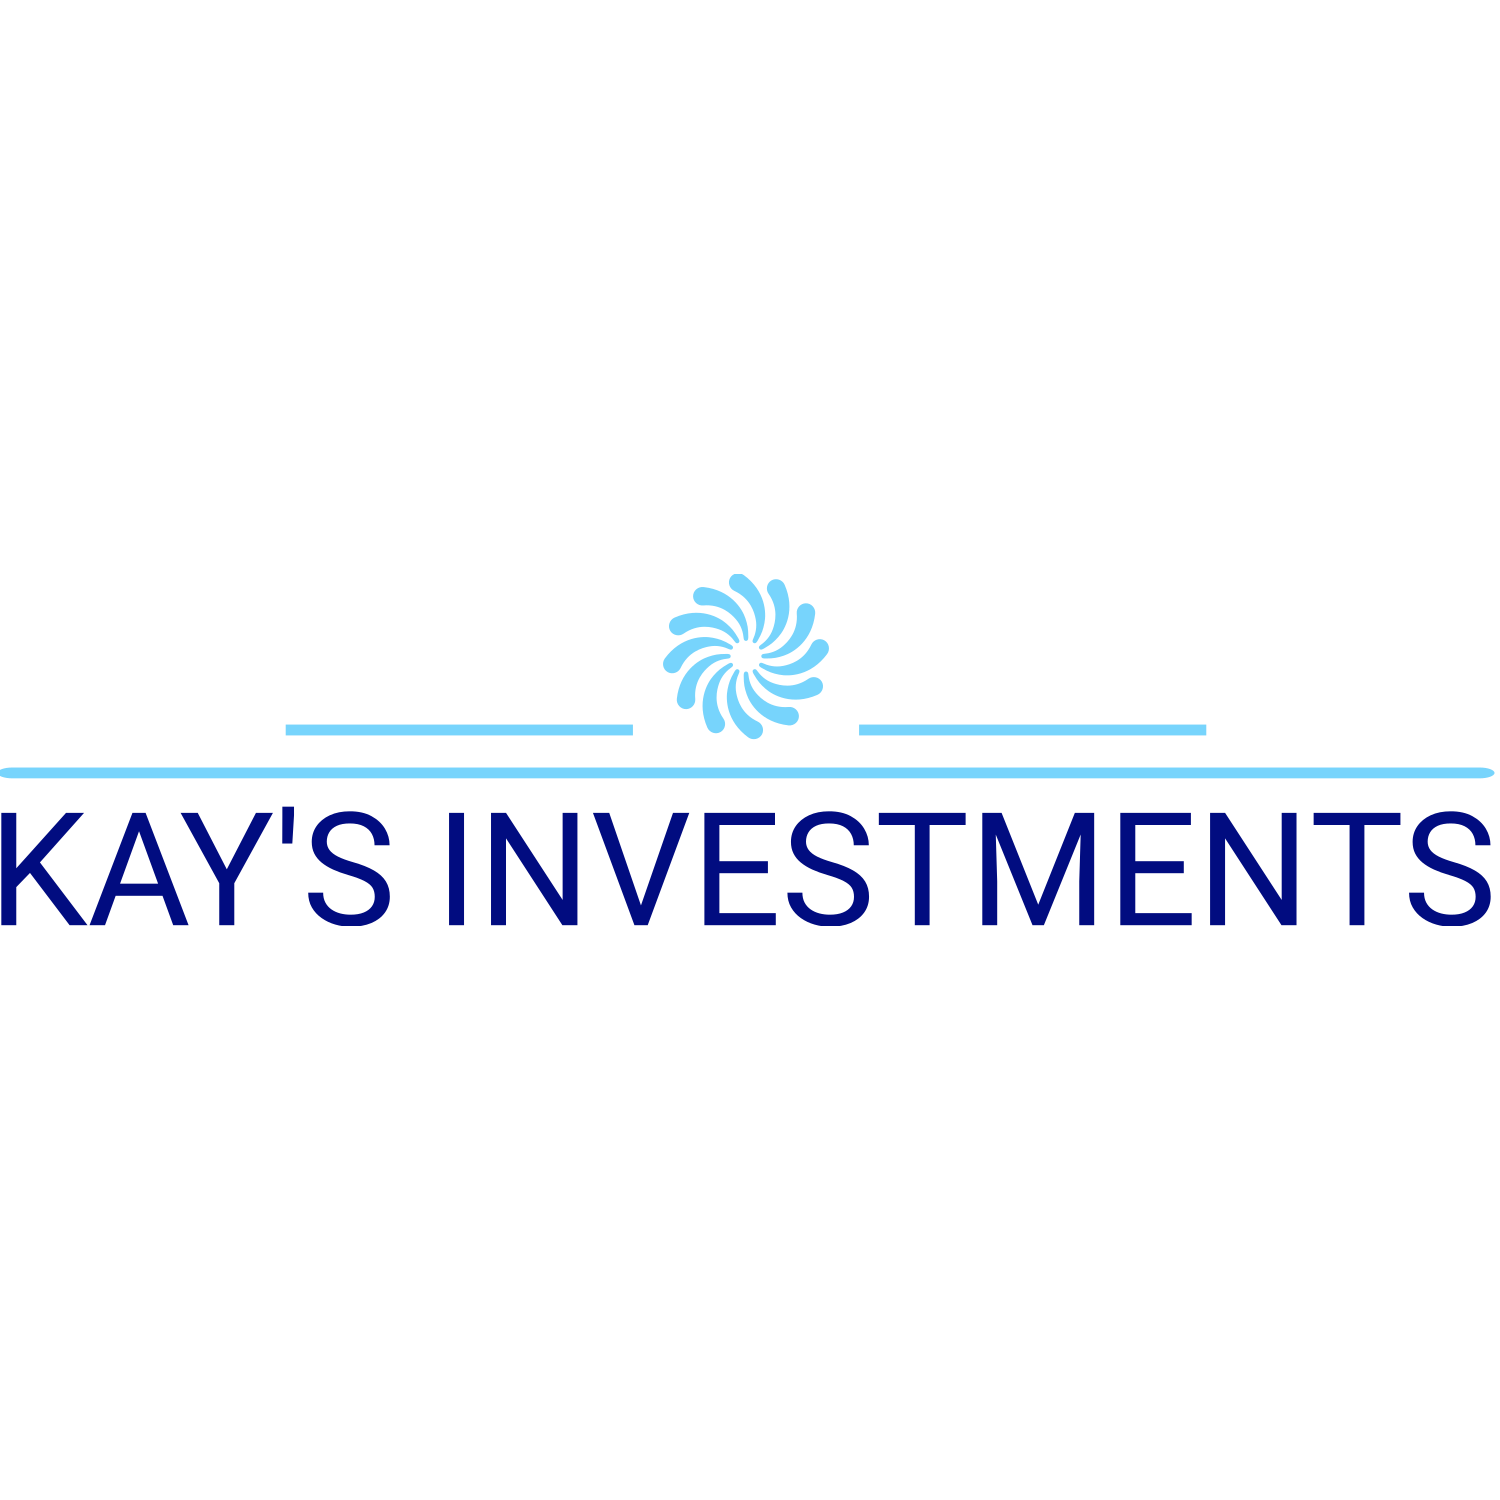 The Kay's Investment